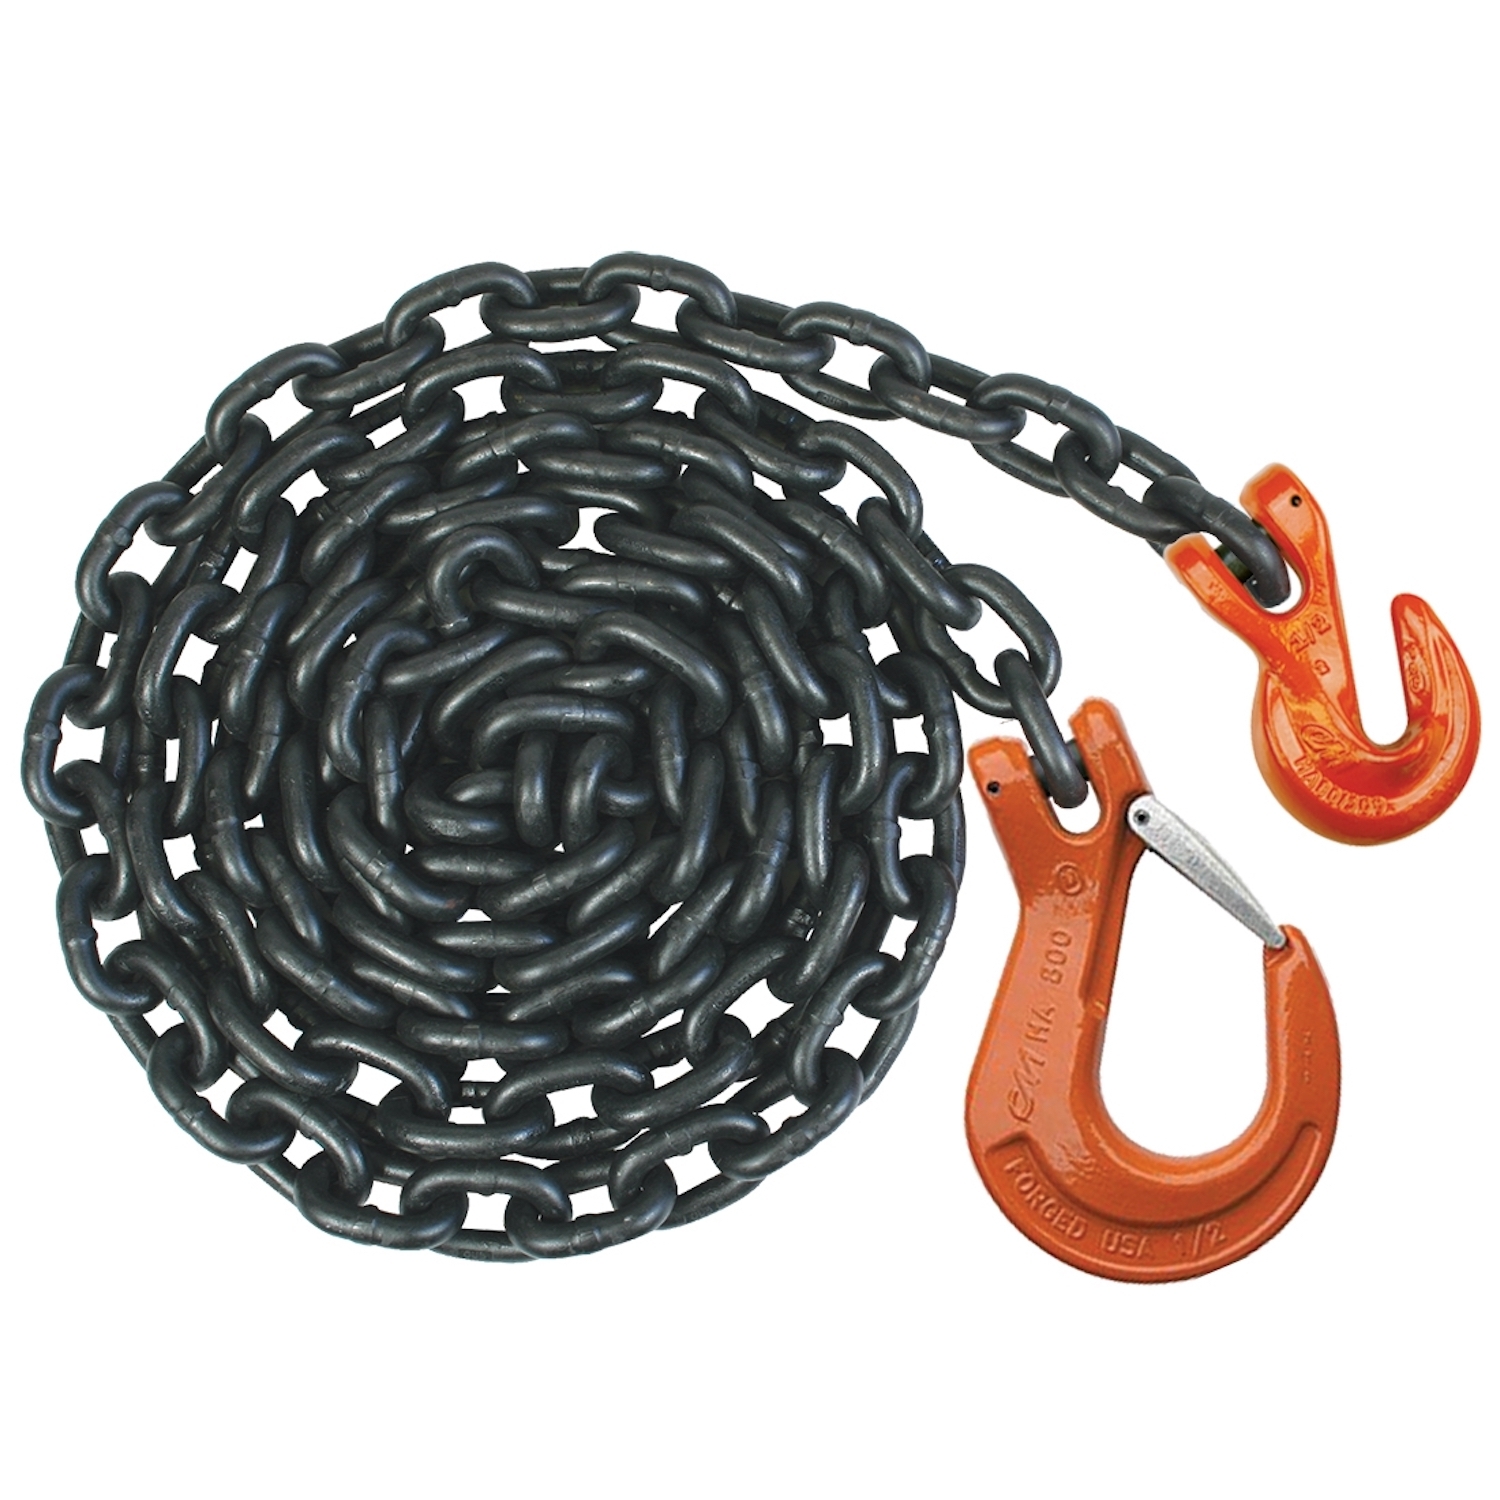 Vulcan Auto Hauling Chain - Grab and Twisted T/J Combo Hook - Grade 70 - 5/16 inch x 72 inch - 4,700 Pound Safe Working Load